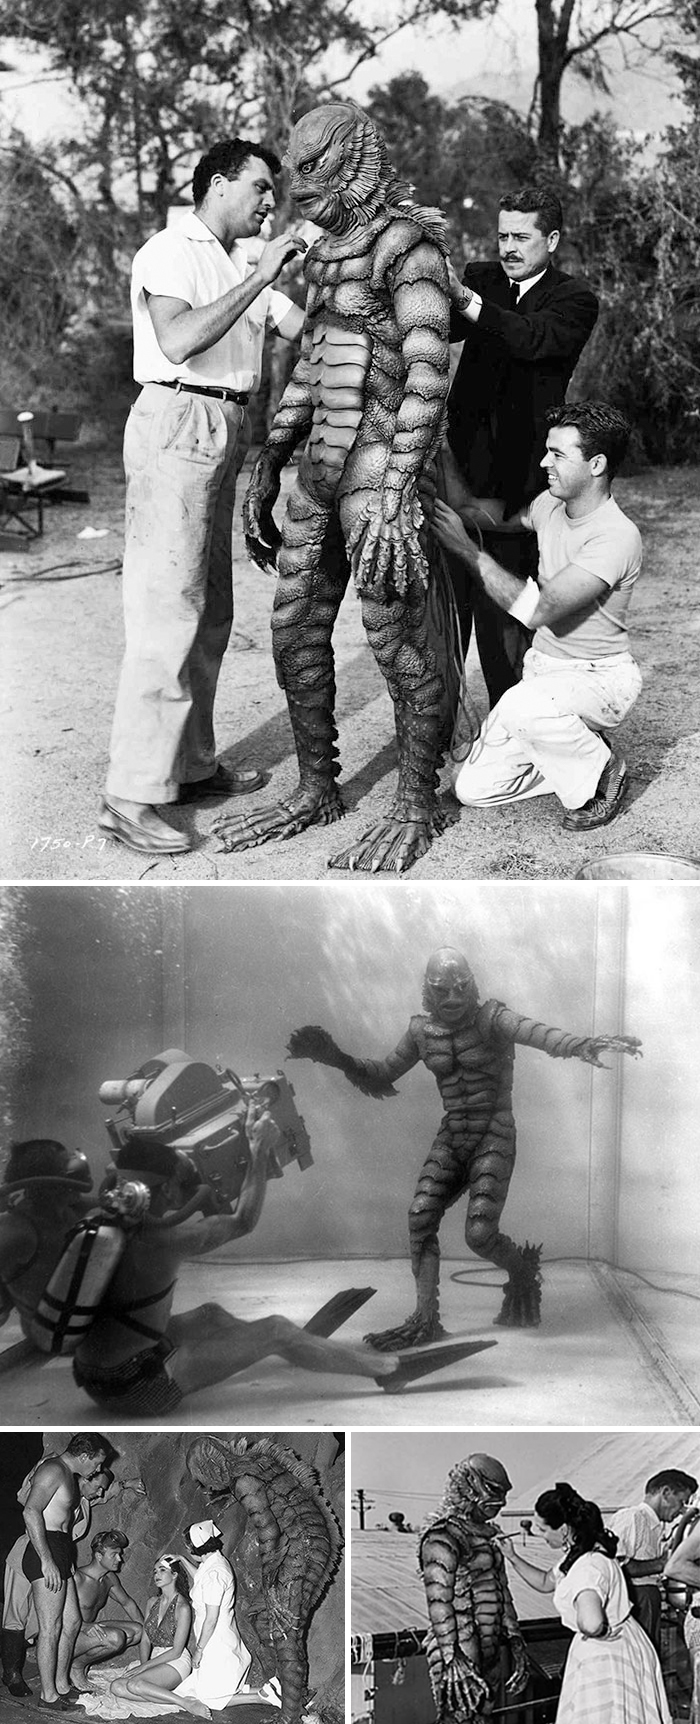 Creature From The Black Lagoon (1954)